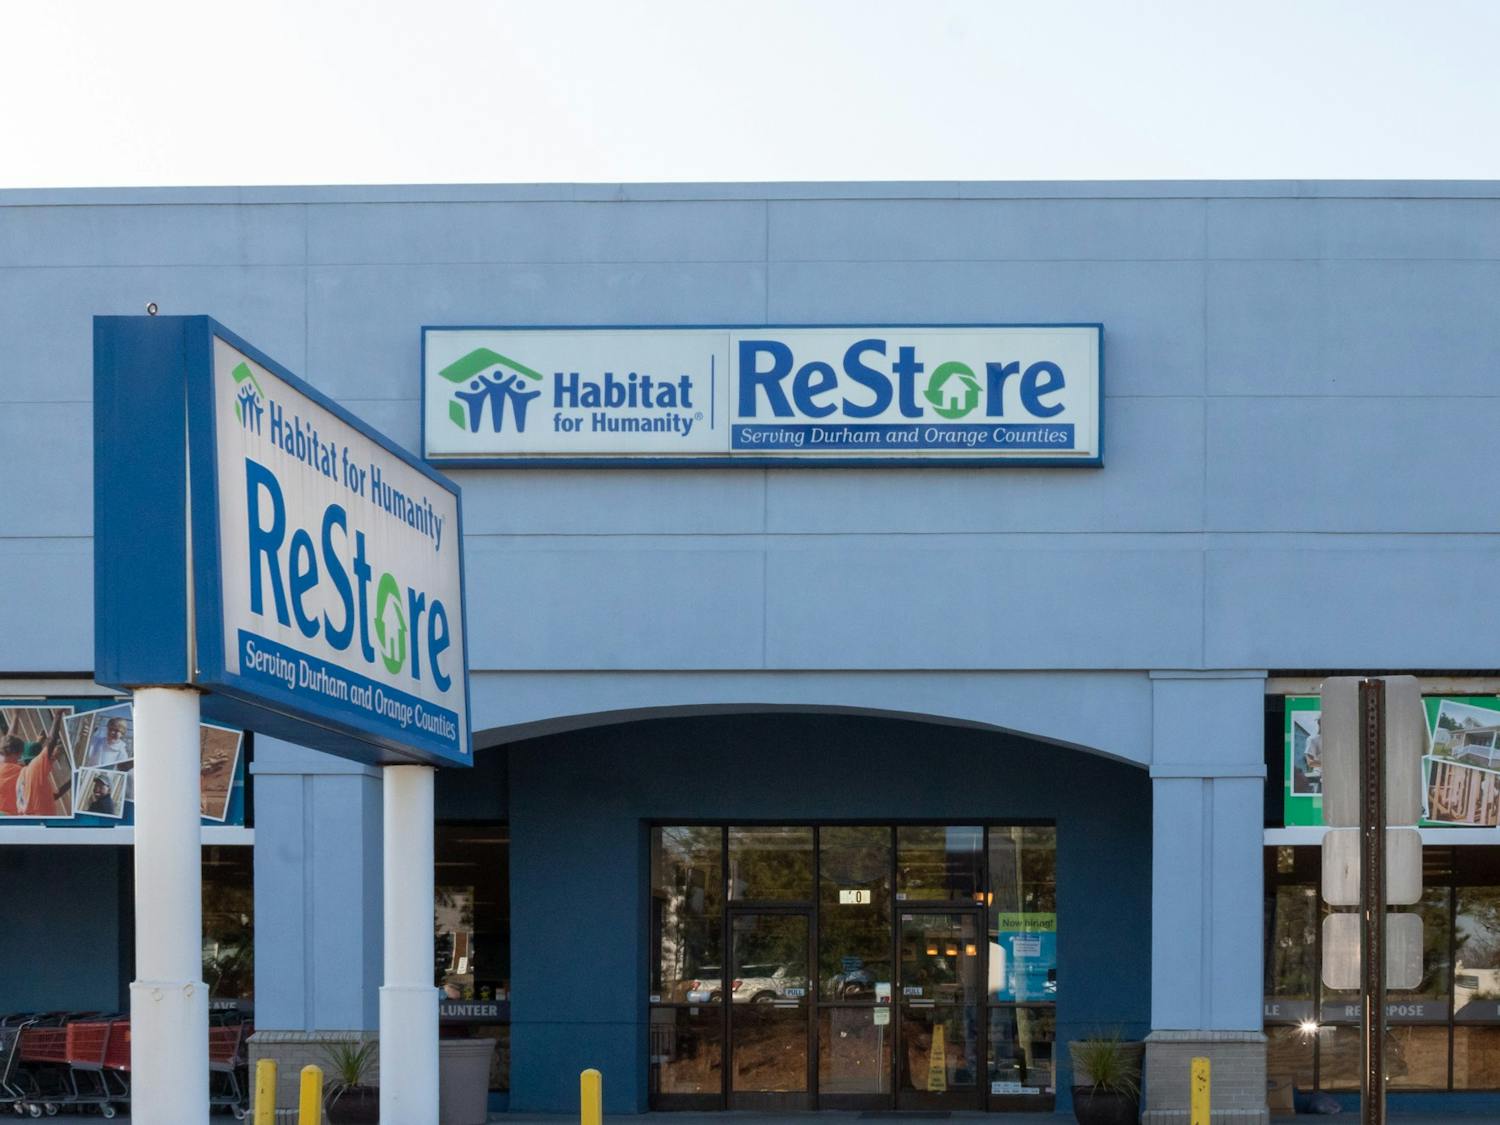 Habitat for Humanity of Orange County, as photographed on Monday, March 21, 2022, has invested almost $600,000 in homes owned by Black community members, according to a recently released racial equity report.